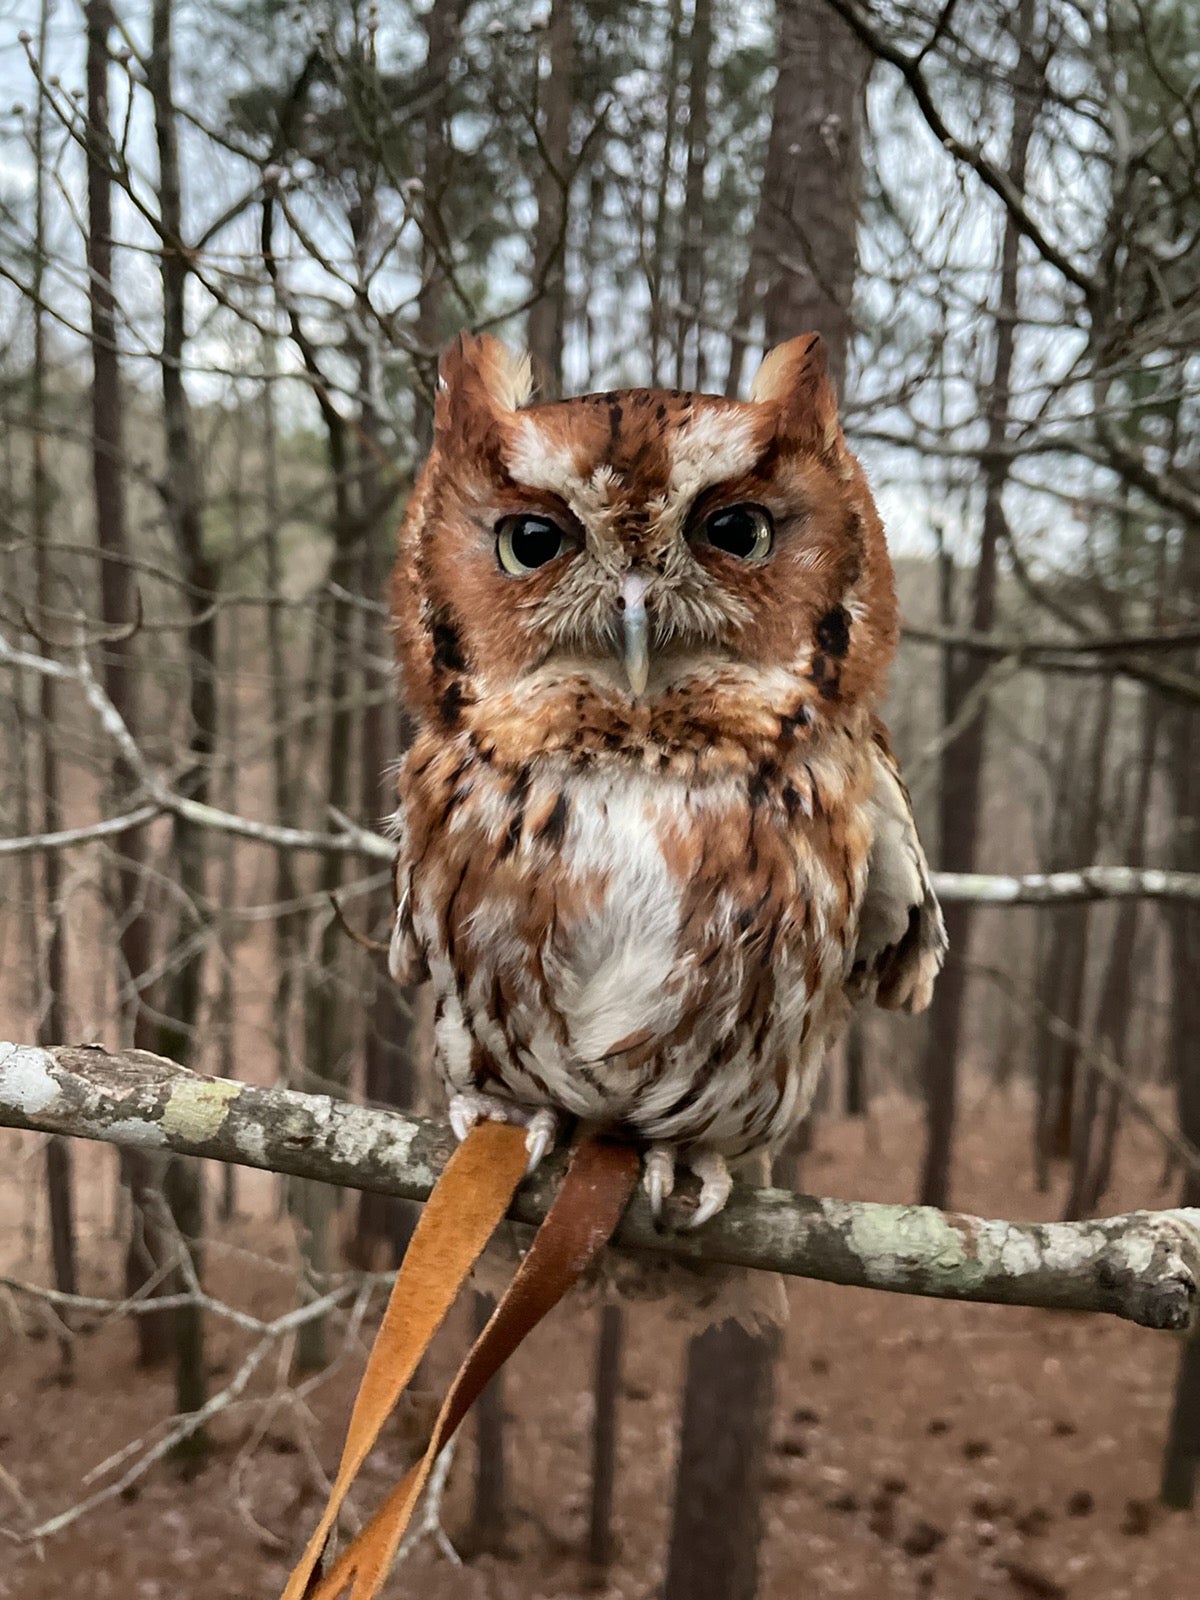 Meet Acer the the Eastern screech owl at the reopening of the Oak Mountain Interpretive Center on May 22.